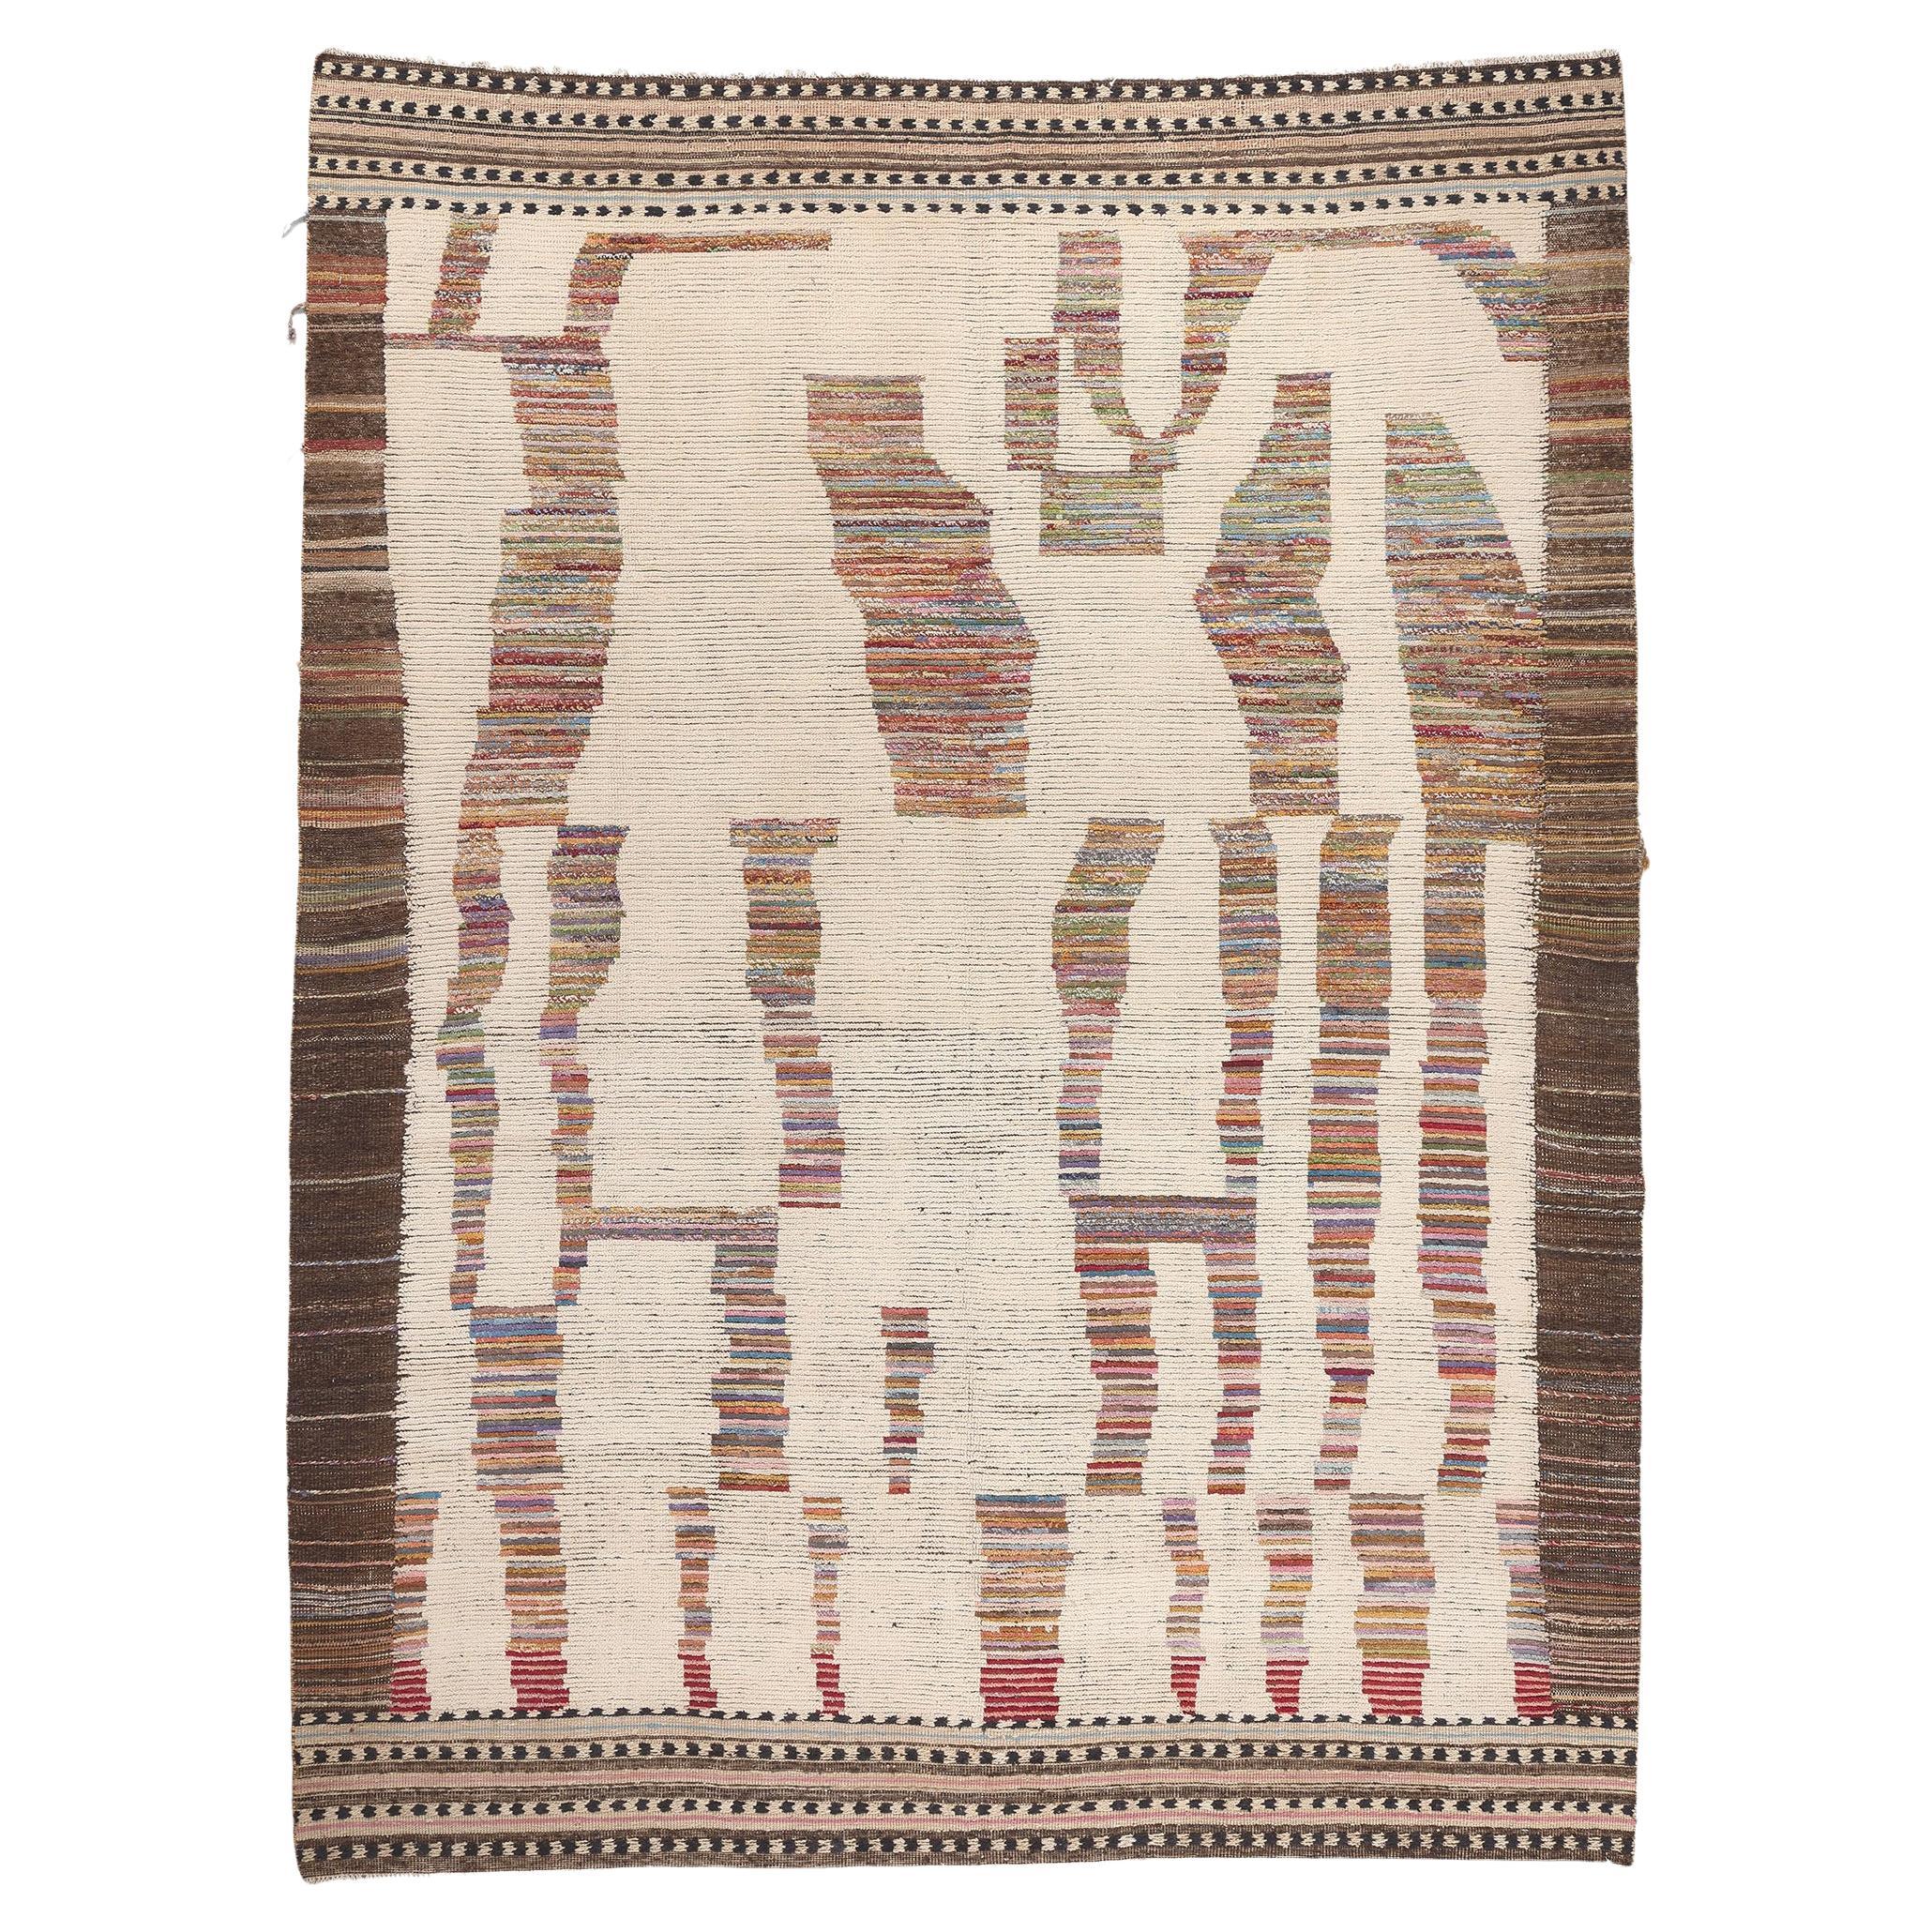 Large Modern Moroccan Area Rug with Short Pile and Earth-Tone Colors For Sale